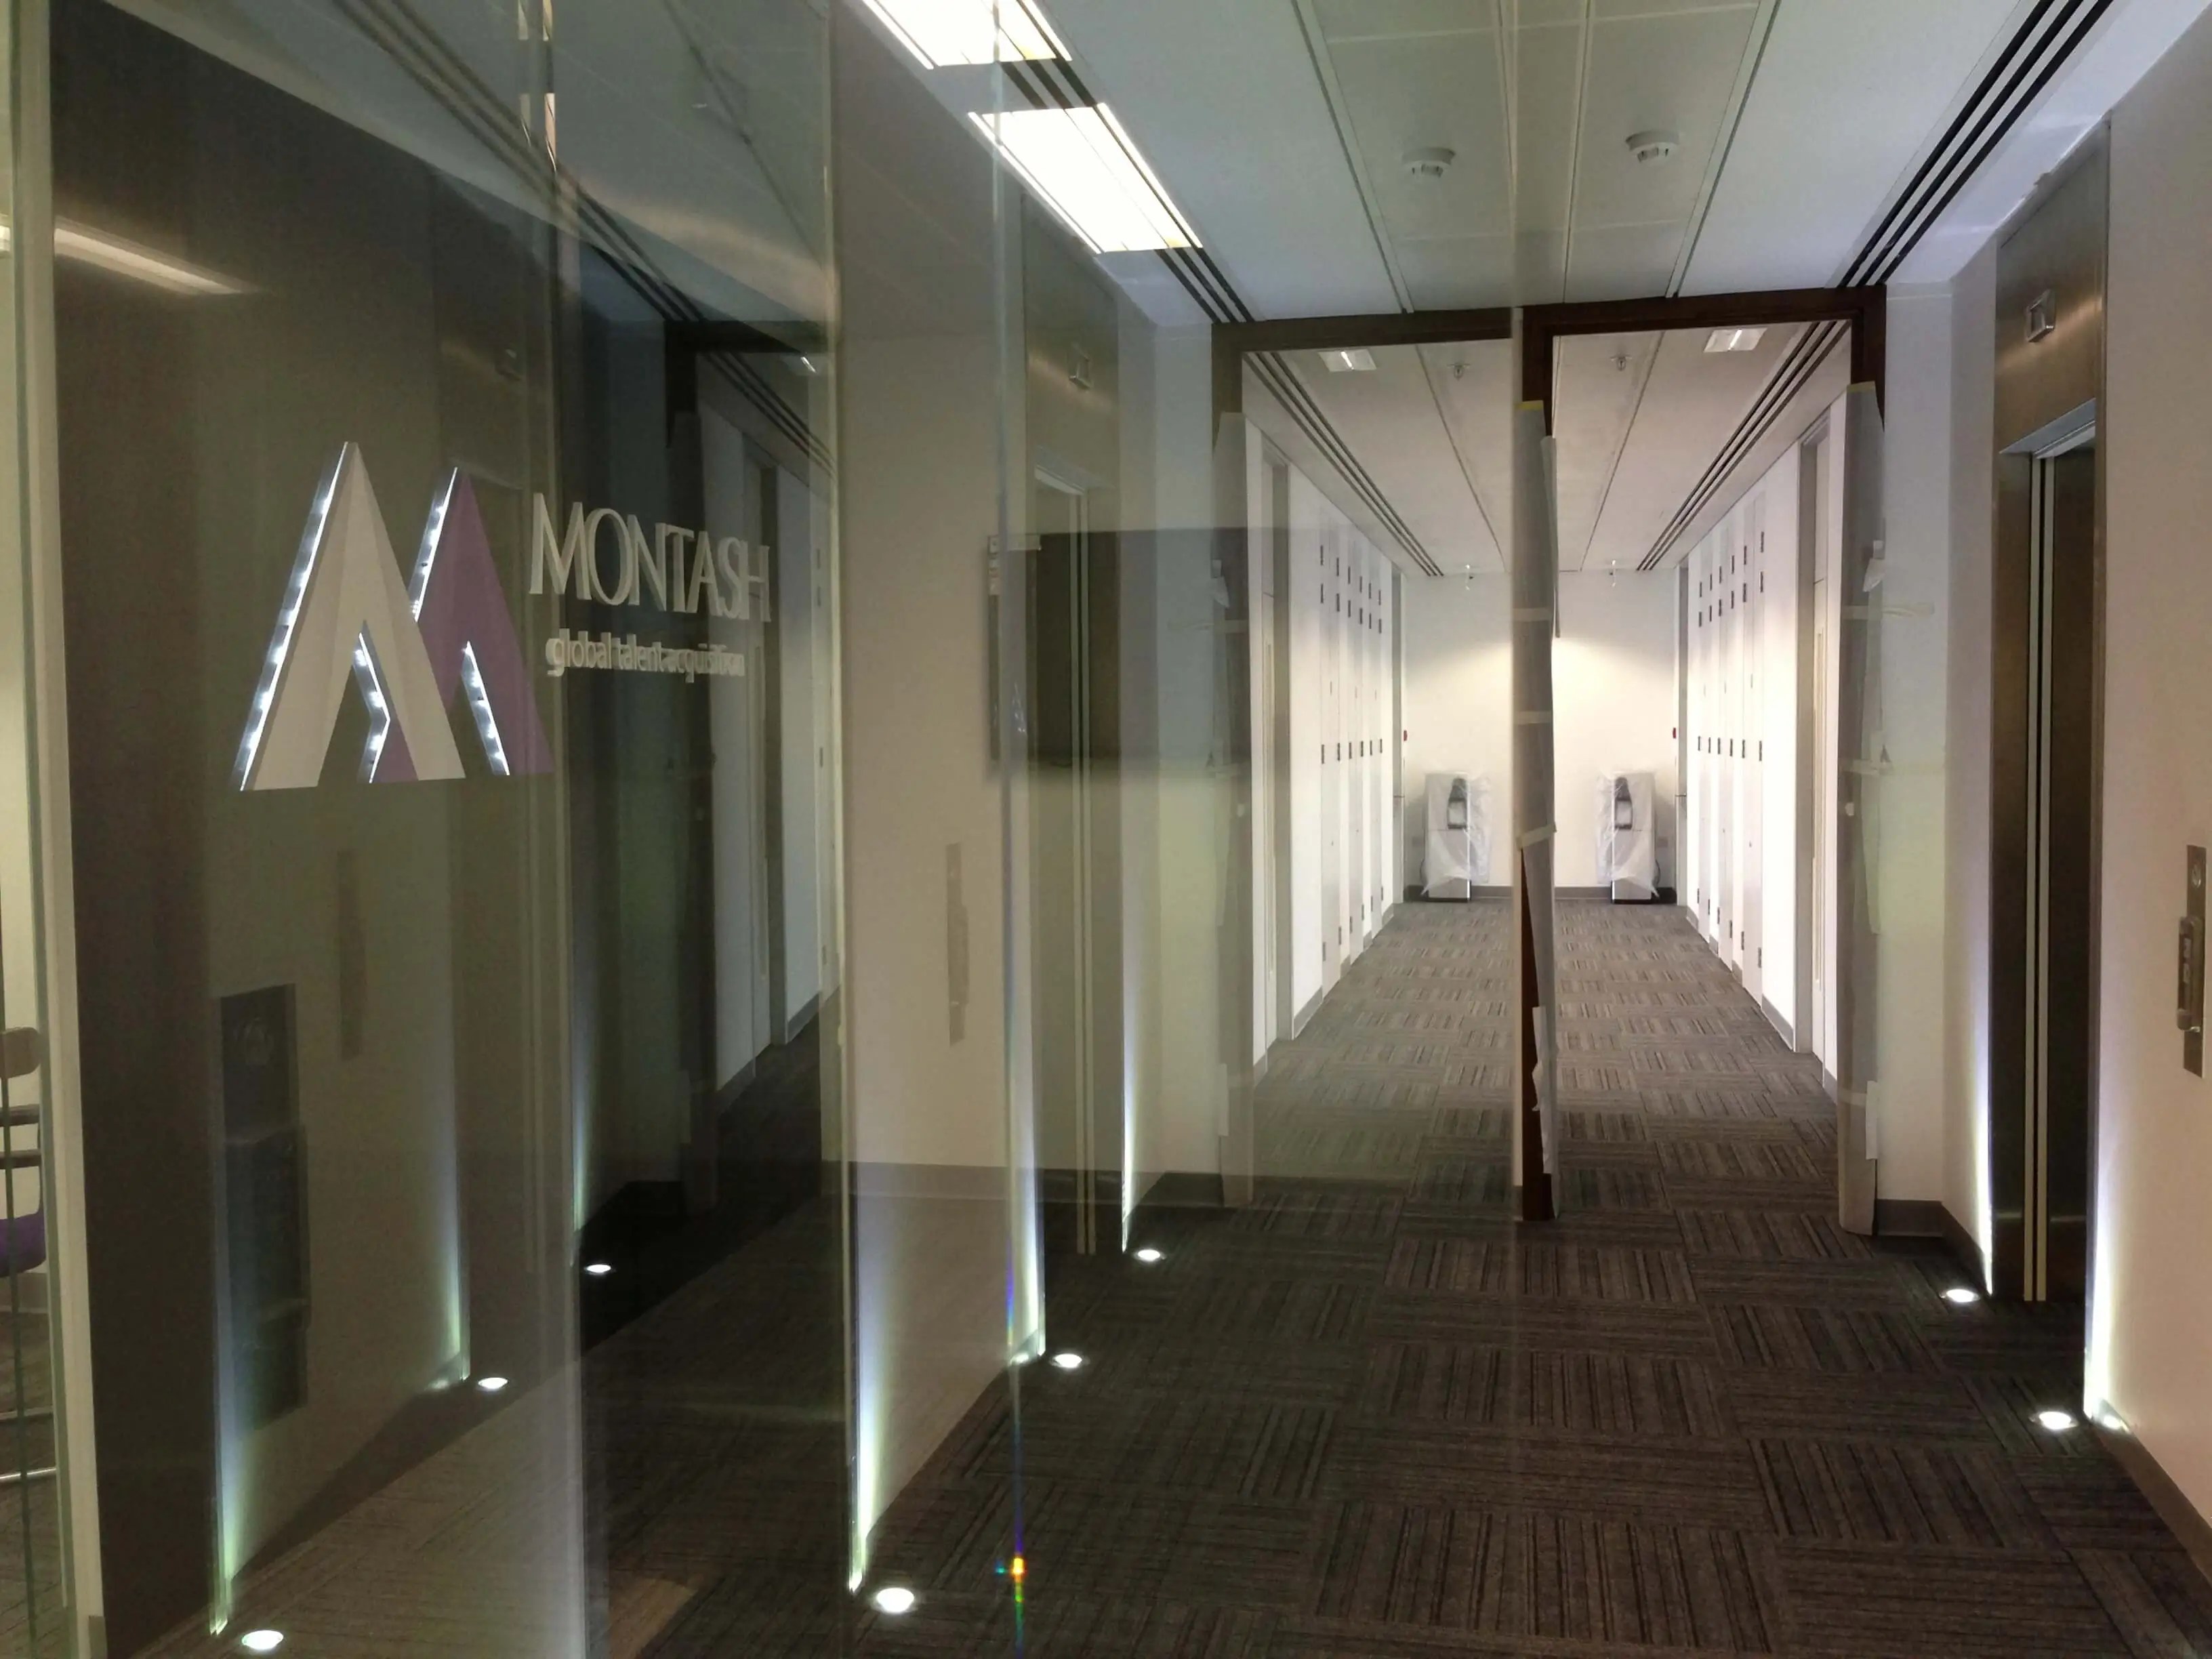 Frameless glass doors and walls in the office